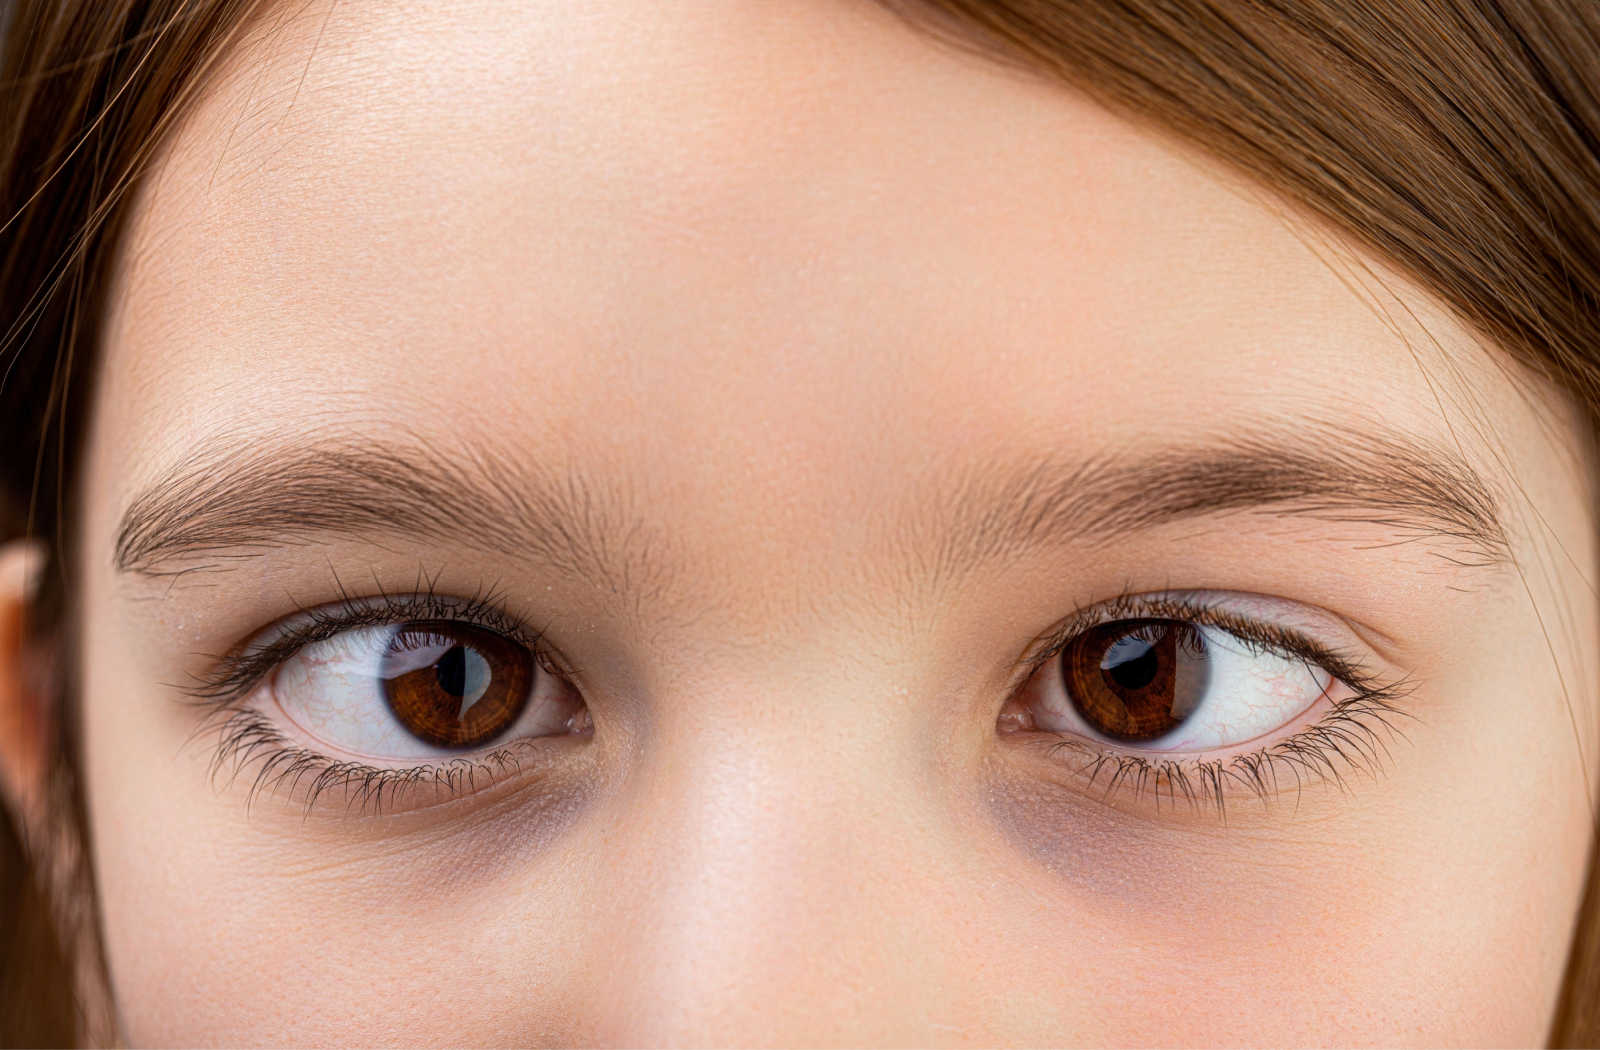 A young girl with visible strabismus.